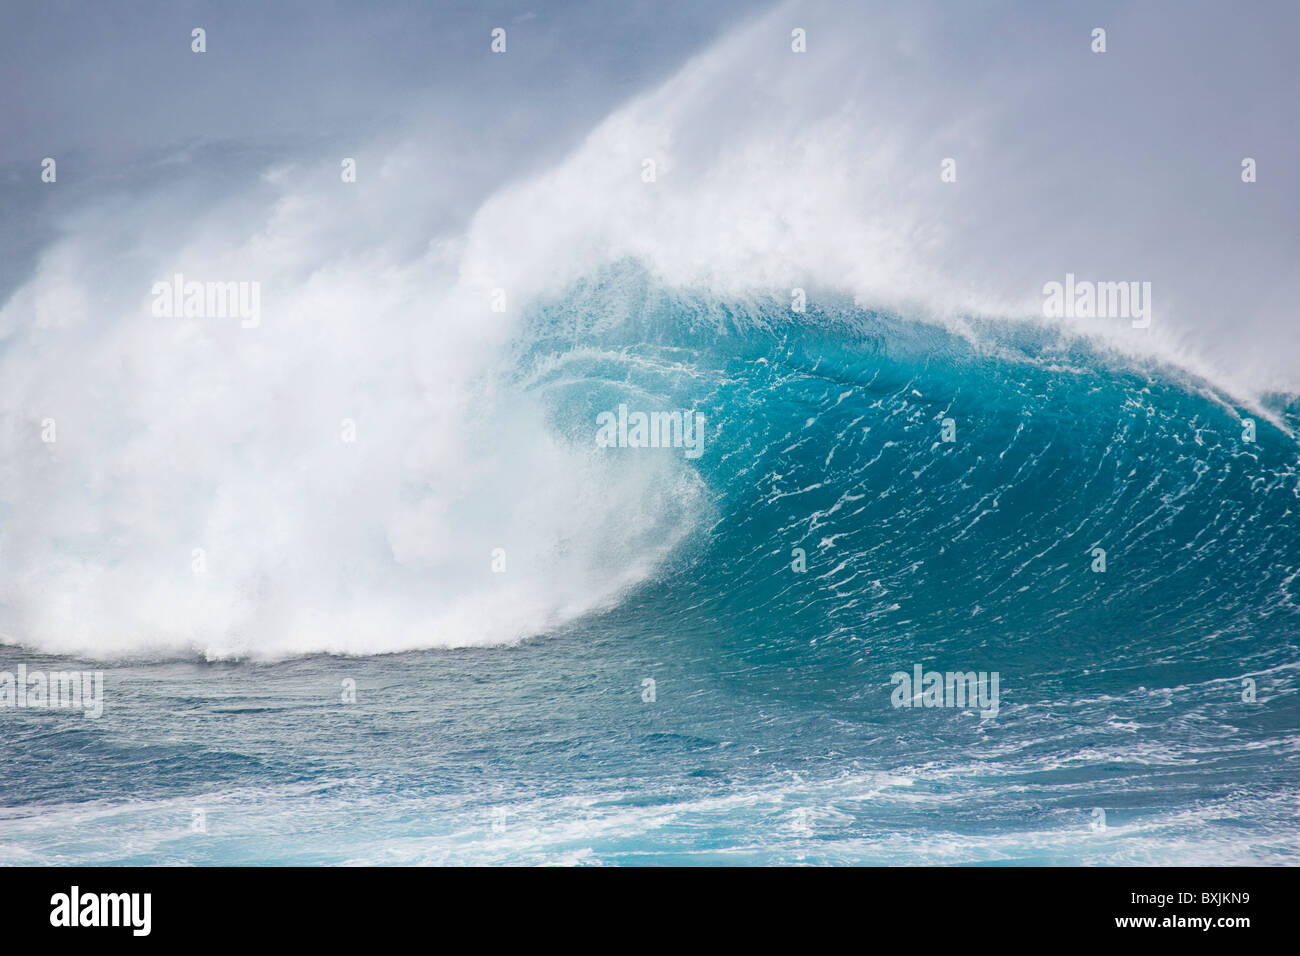 Huge breaking wave with a nice tube. Stock Photo